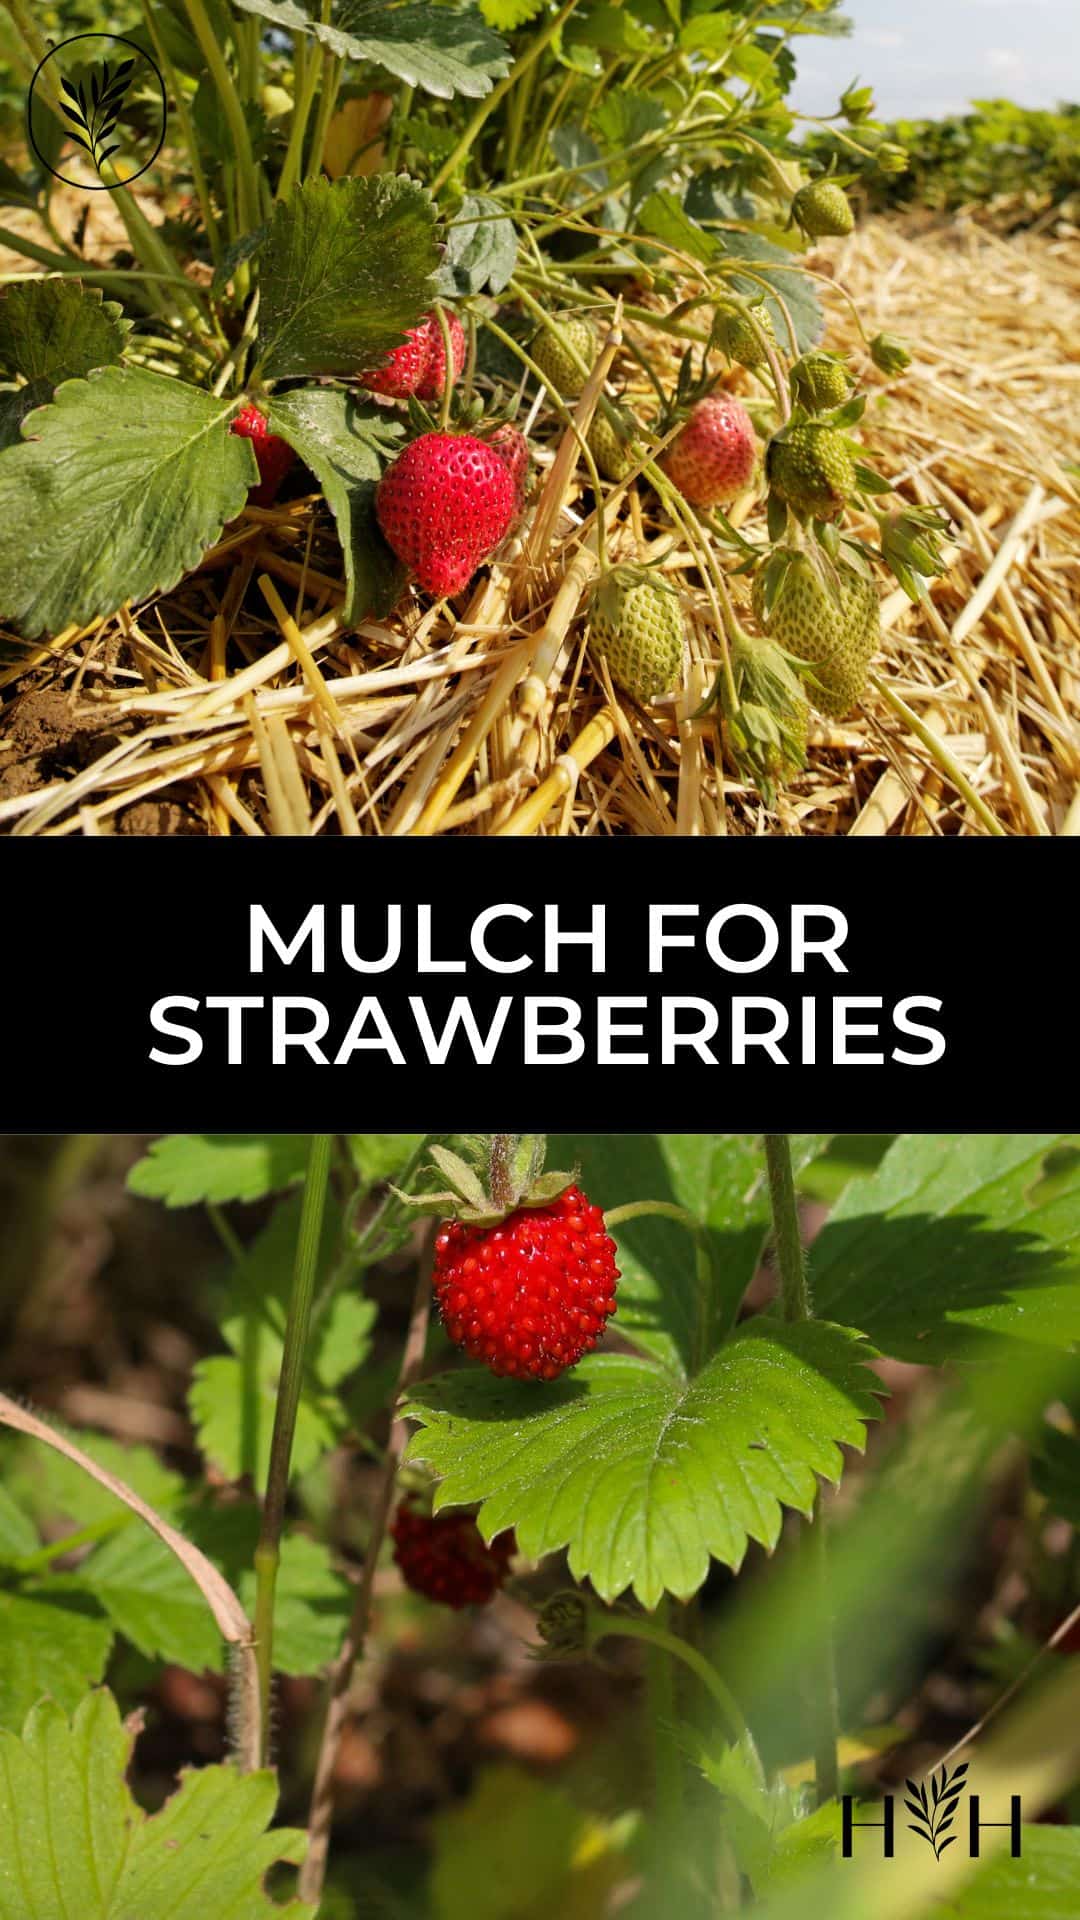 Mulch for strawberries via @home4theharvest